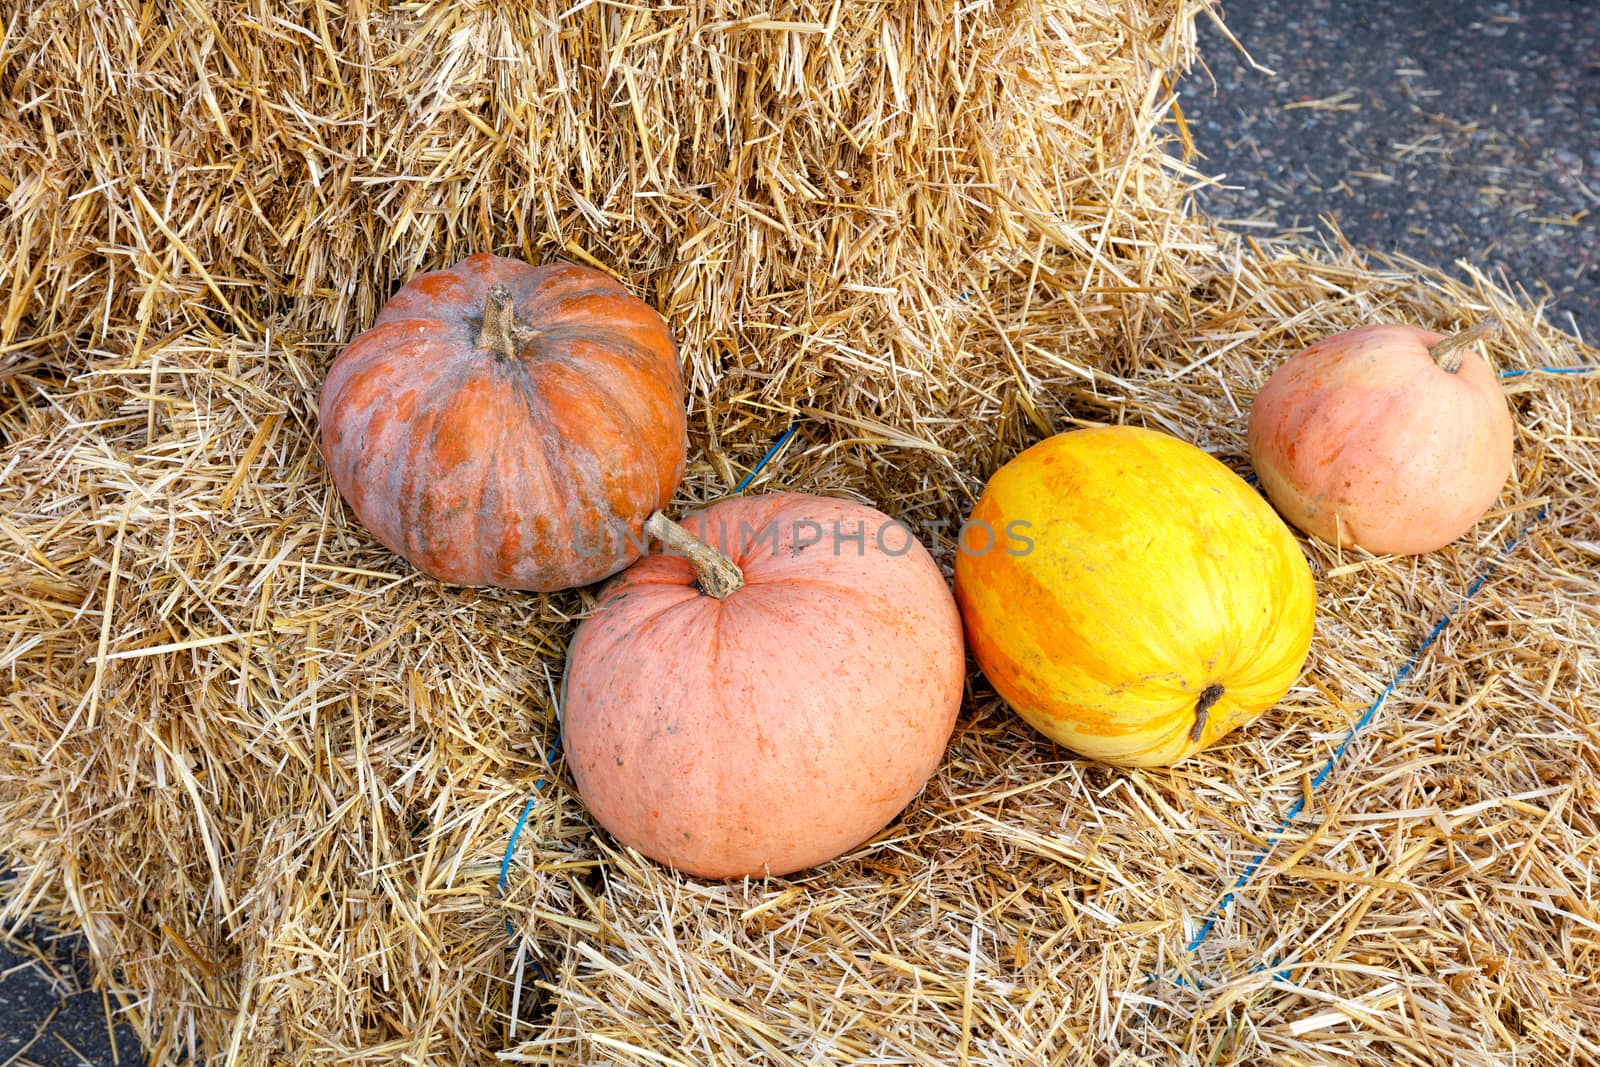 Several large orange pumpkins lie on straw bales during the harvest festival outside in the afternoon.